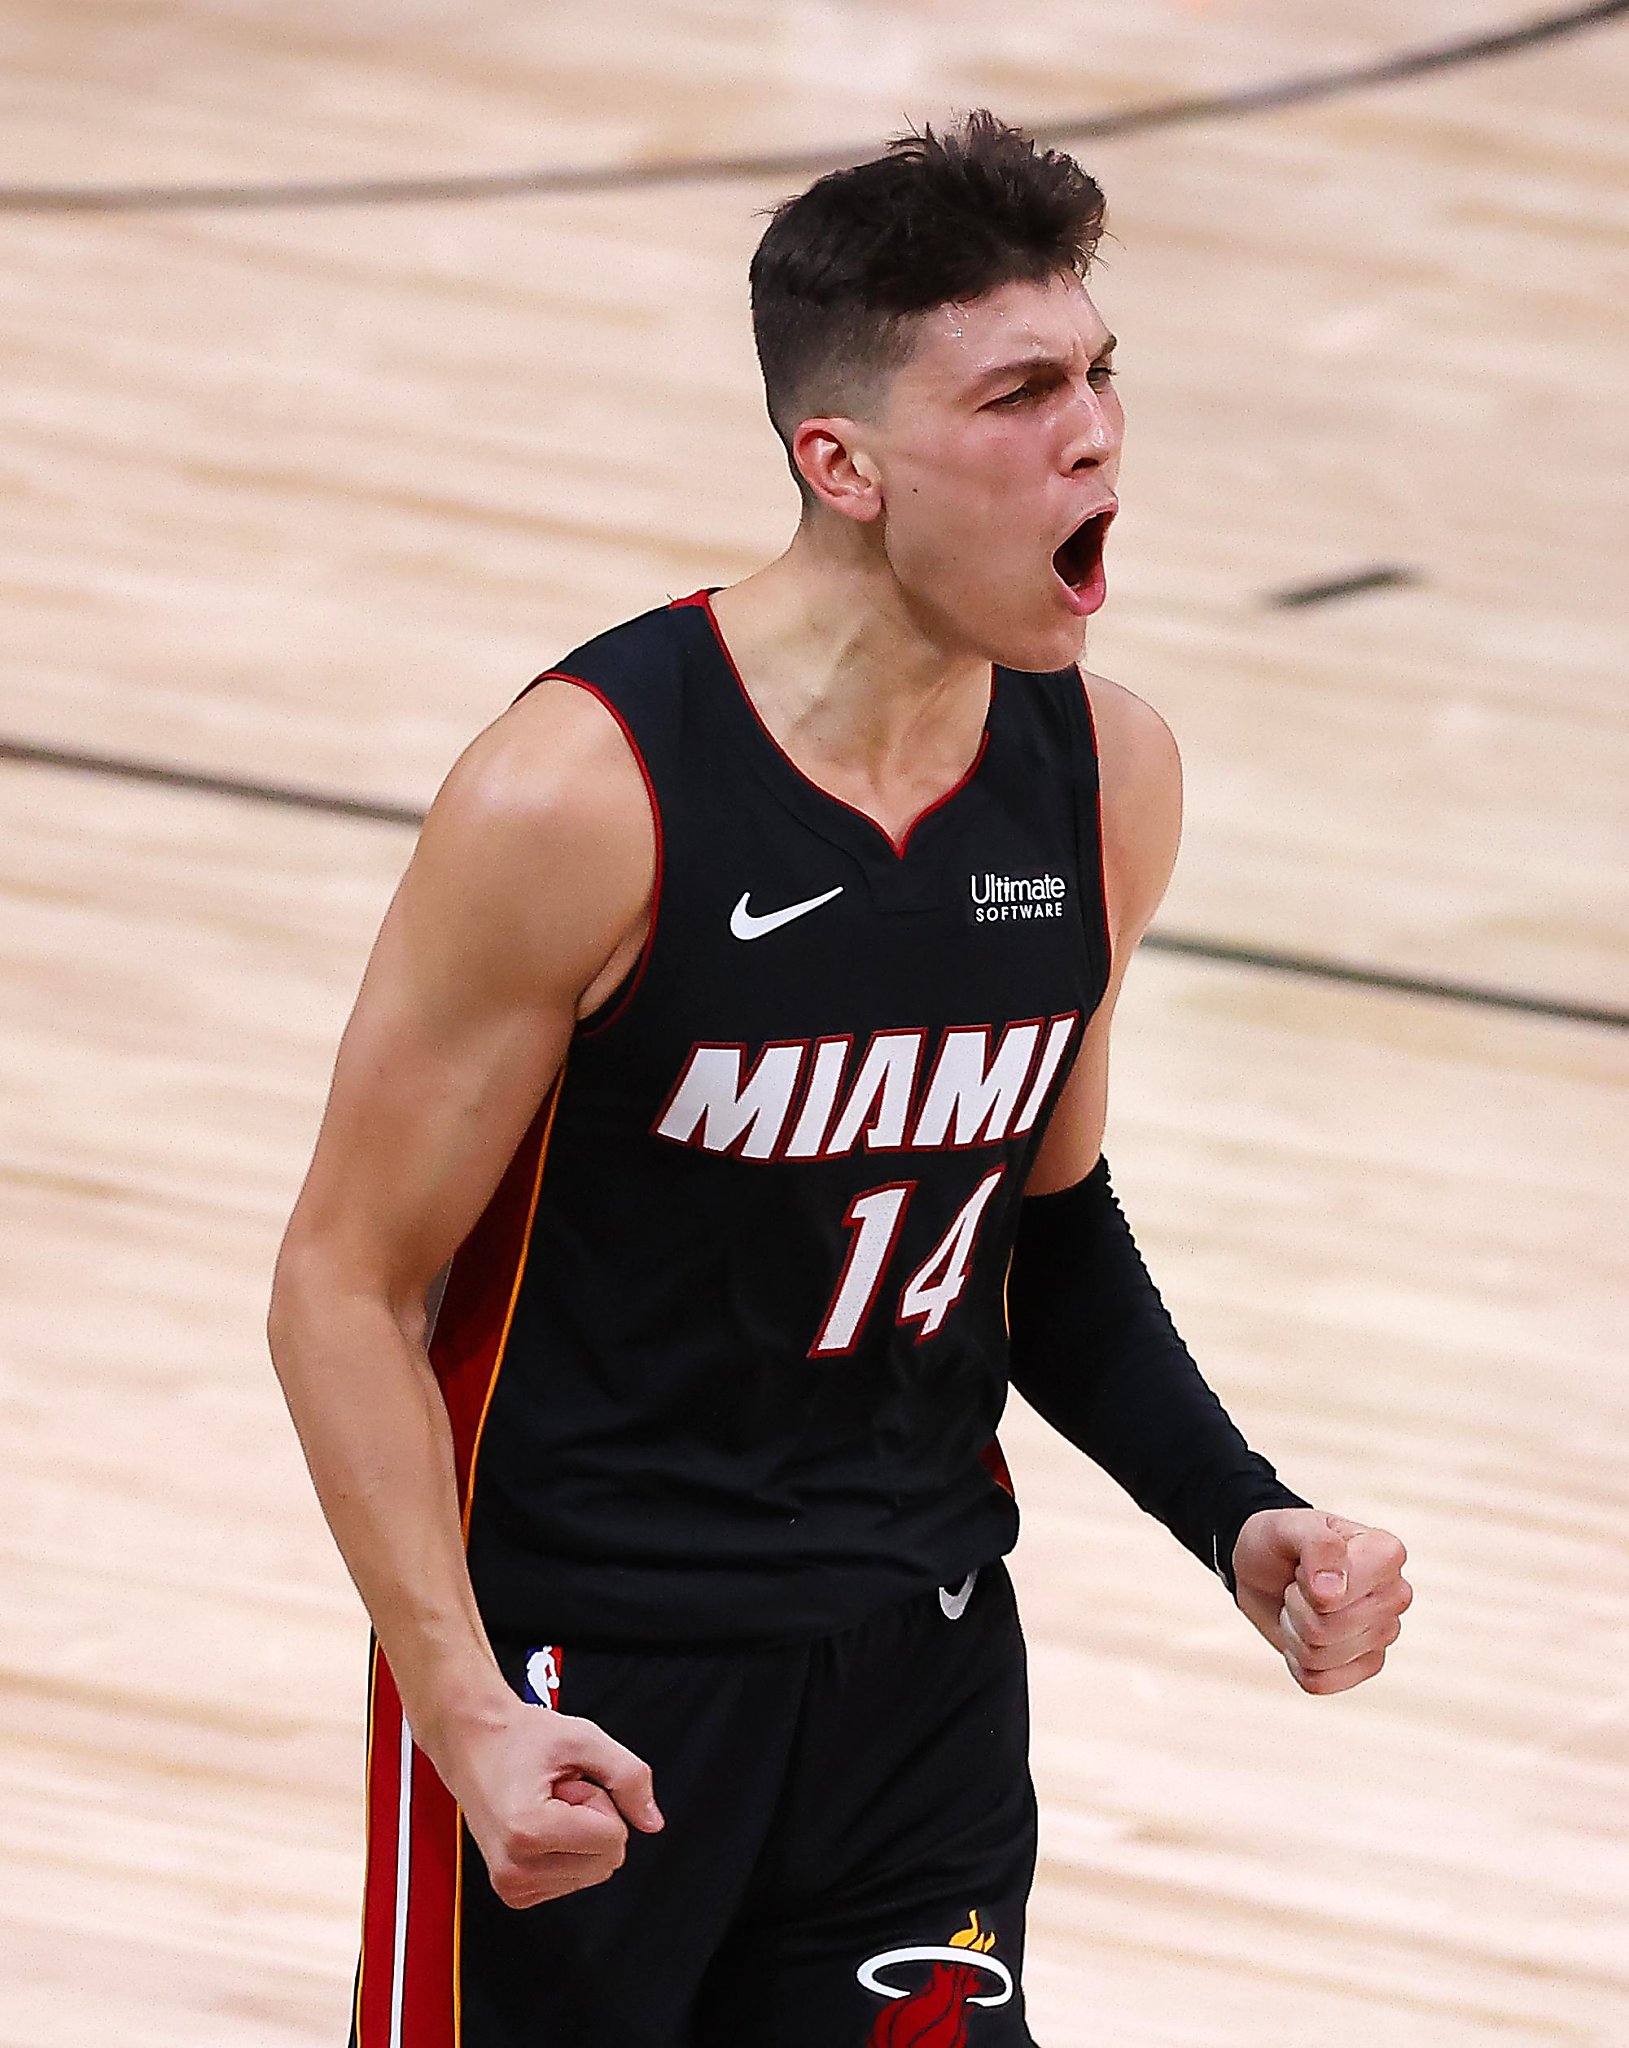 Tyler Herro of the Miami Heat warms up before the game against the News  Photo - Getty Images